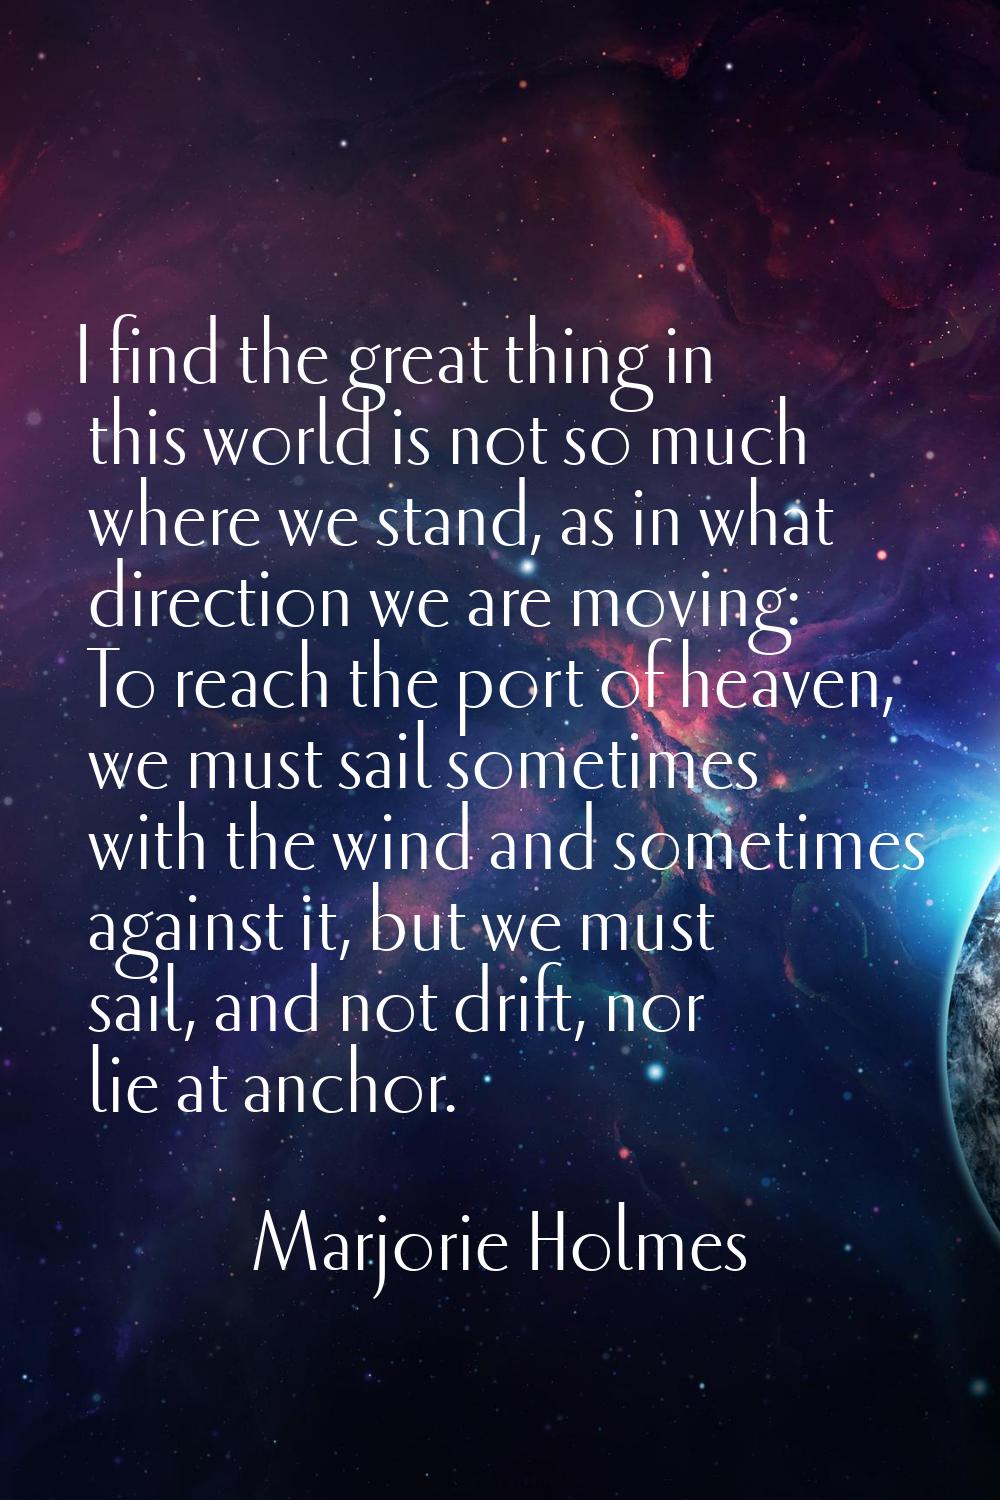 I find the great thing in this world is not so much where we stand, as in what direction we are mov